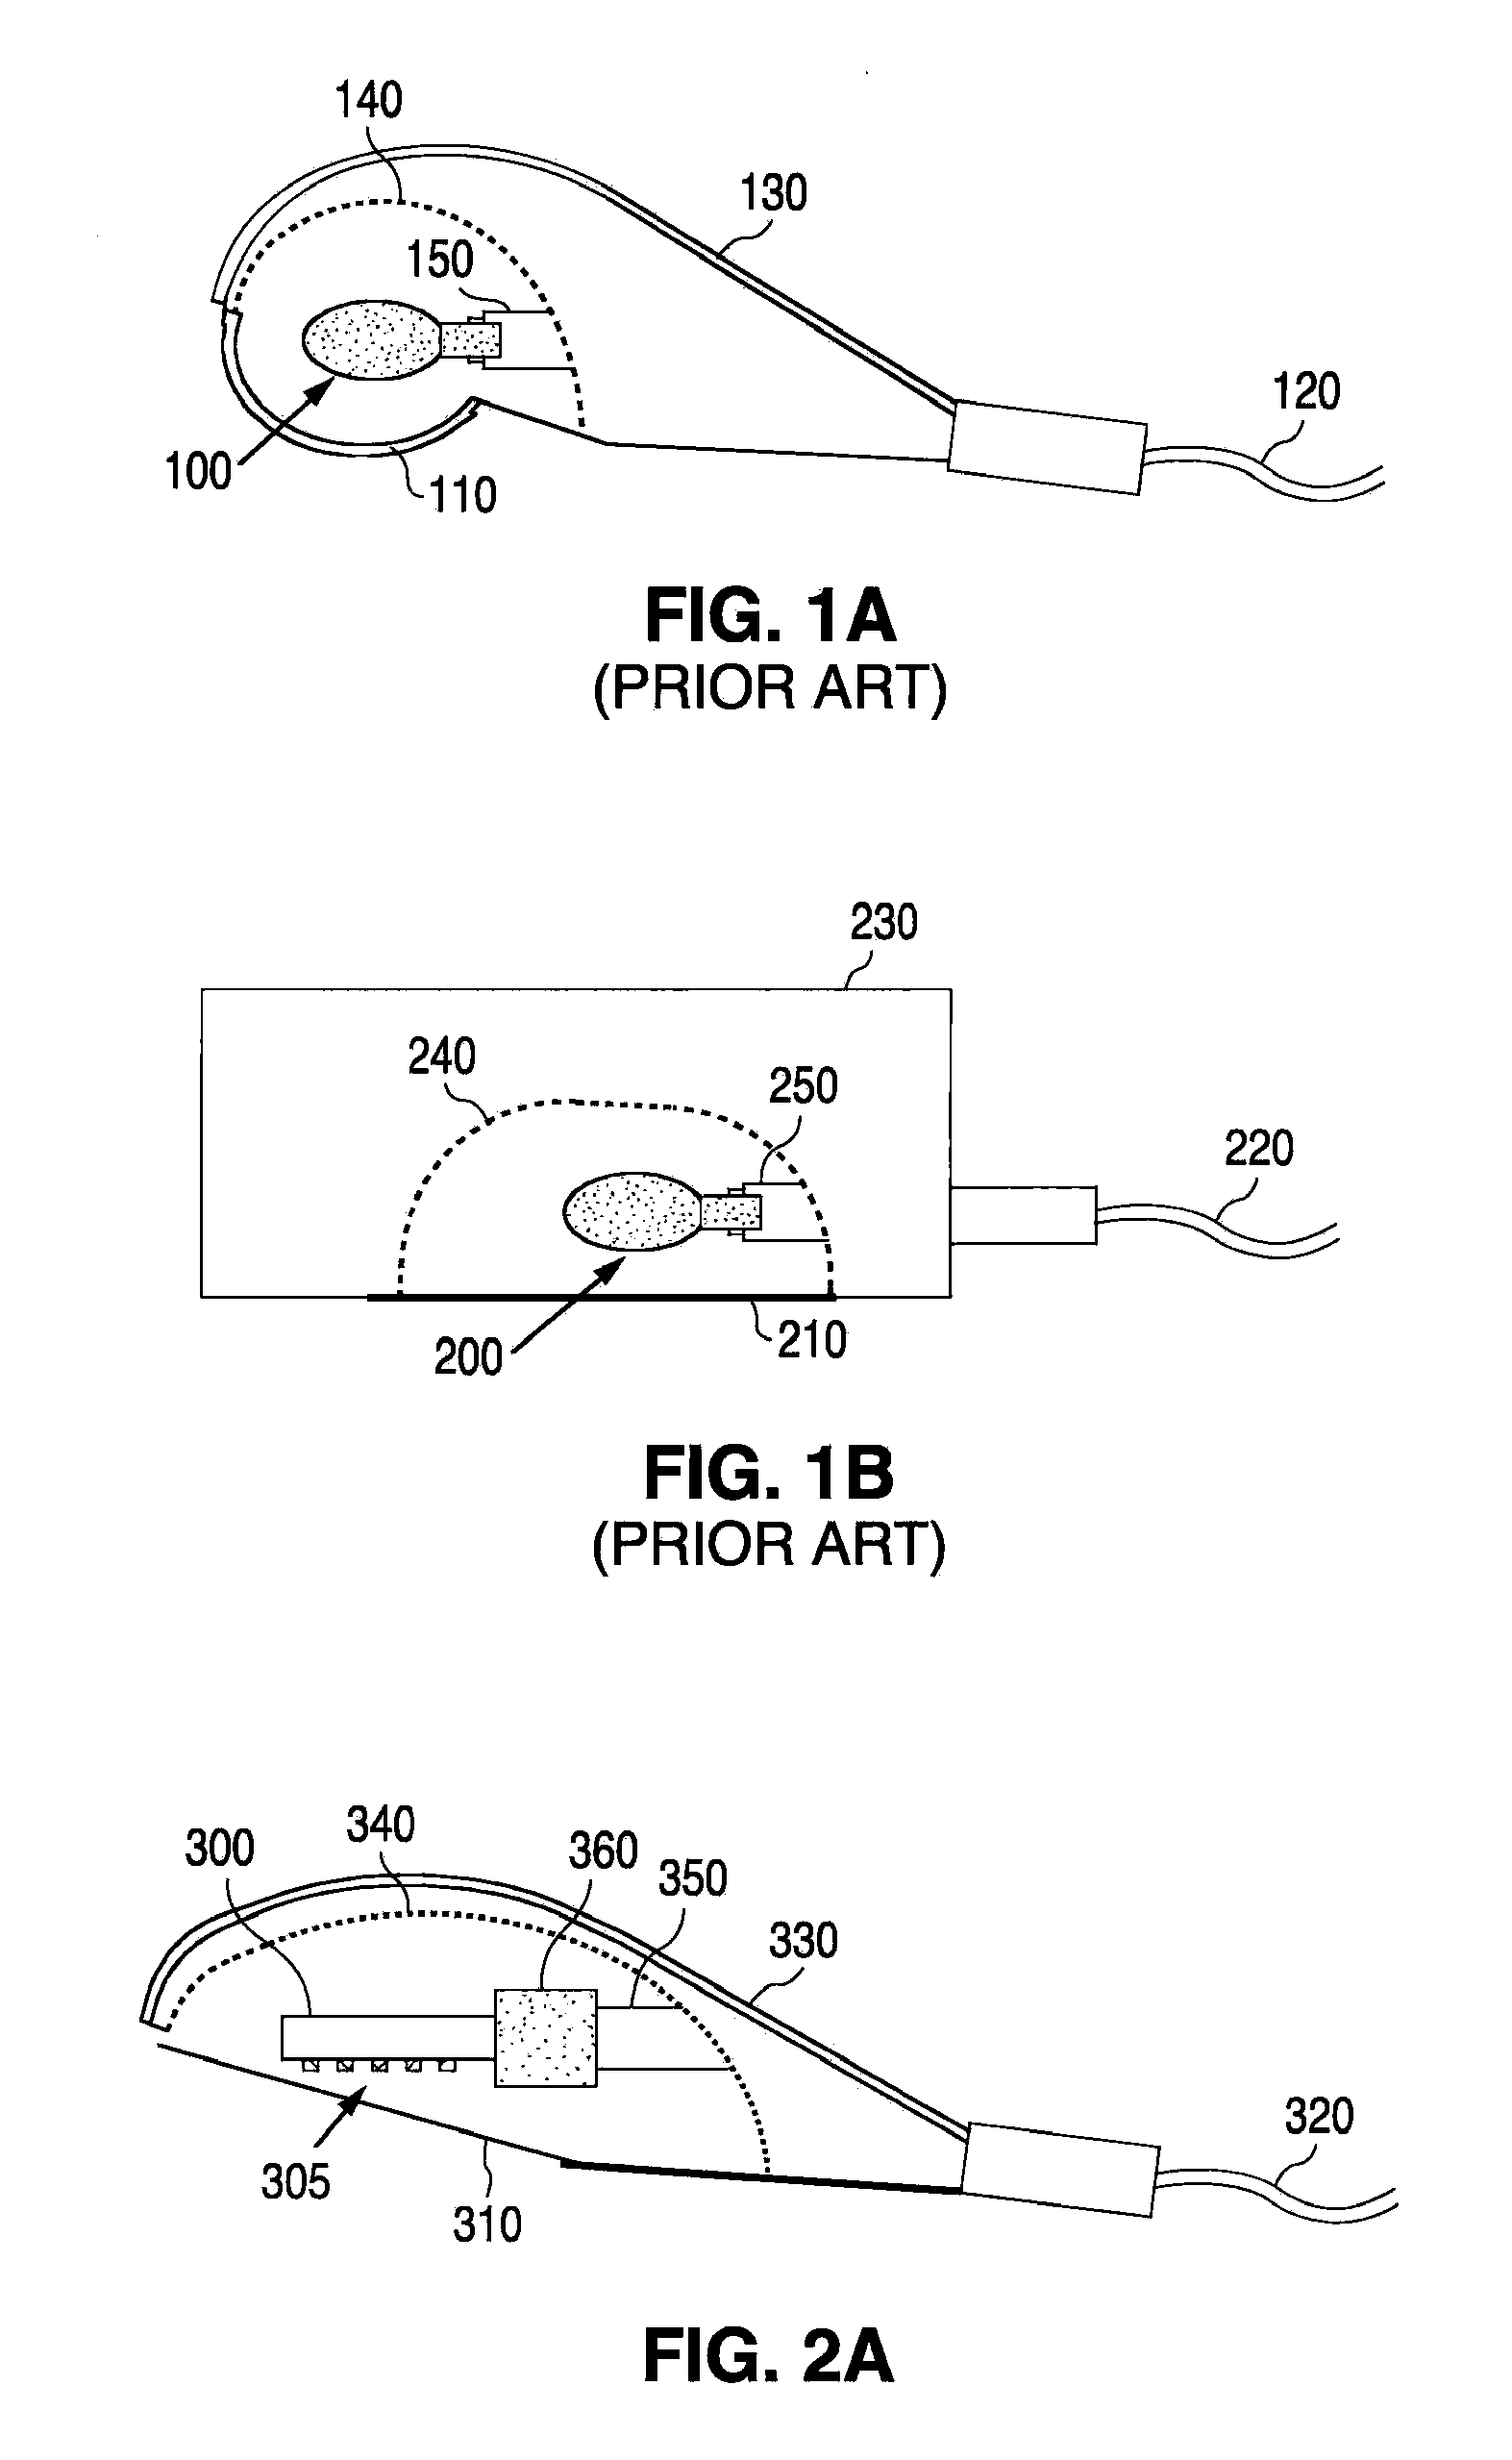 Light emitting diode (LED) based street light and other lighting applications